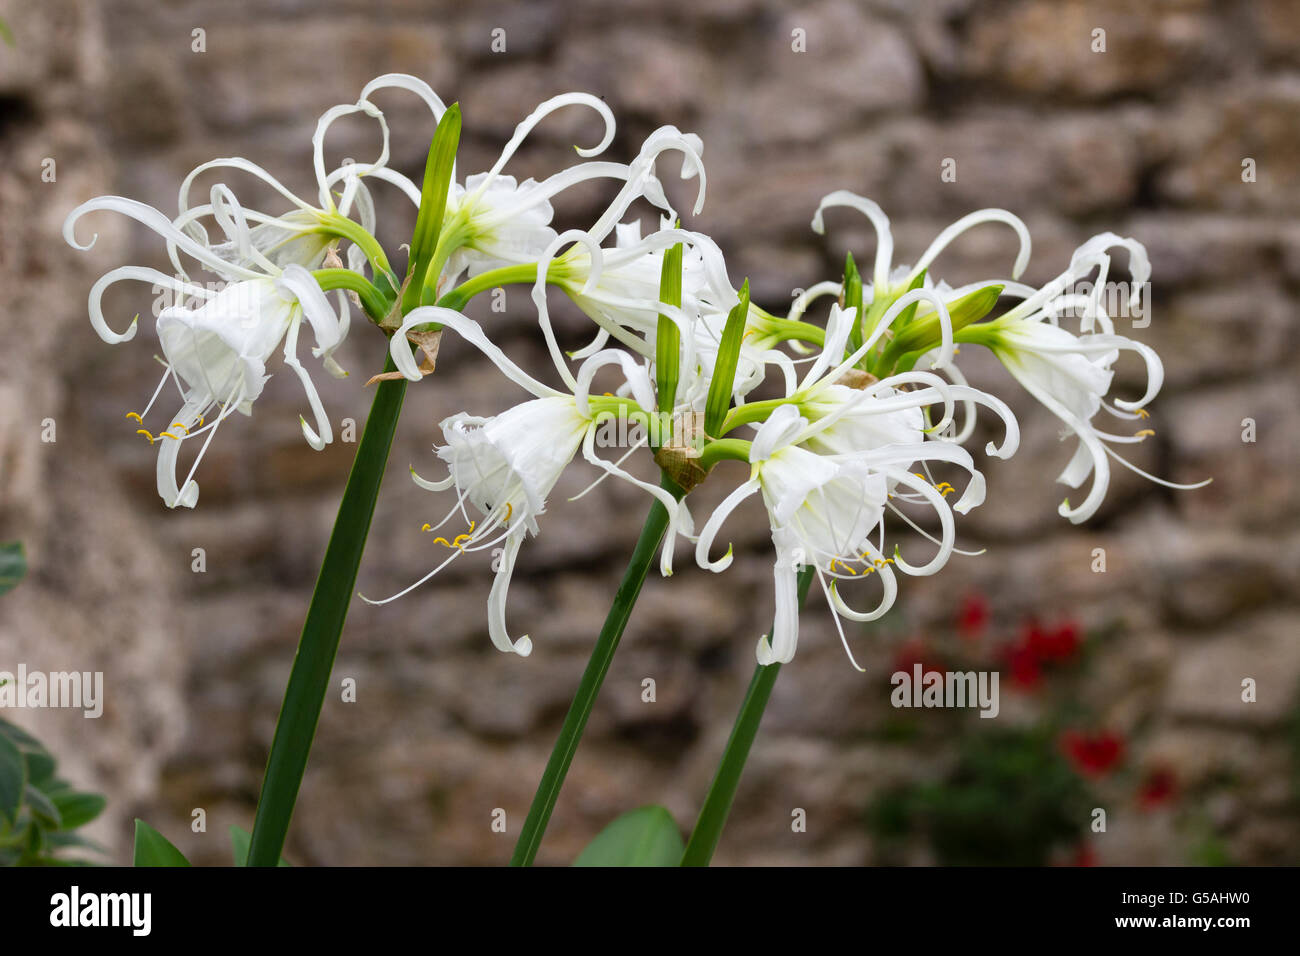 Spidery white highly fragrant flowers of the Peruvian daffodil, Hymenocallis x festalis Stock Photo